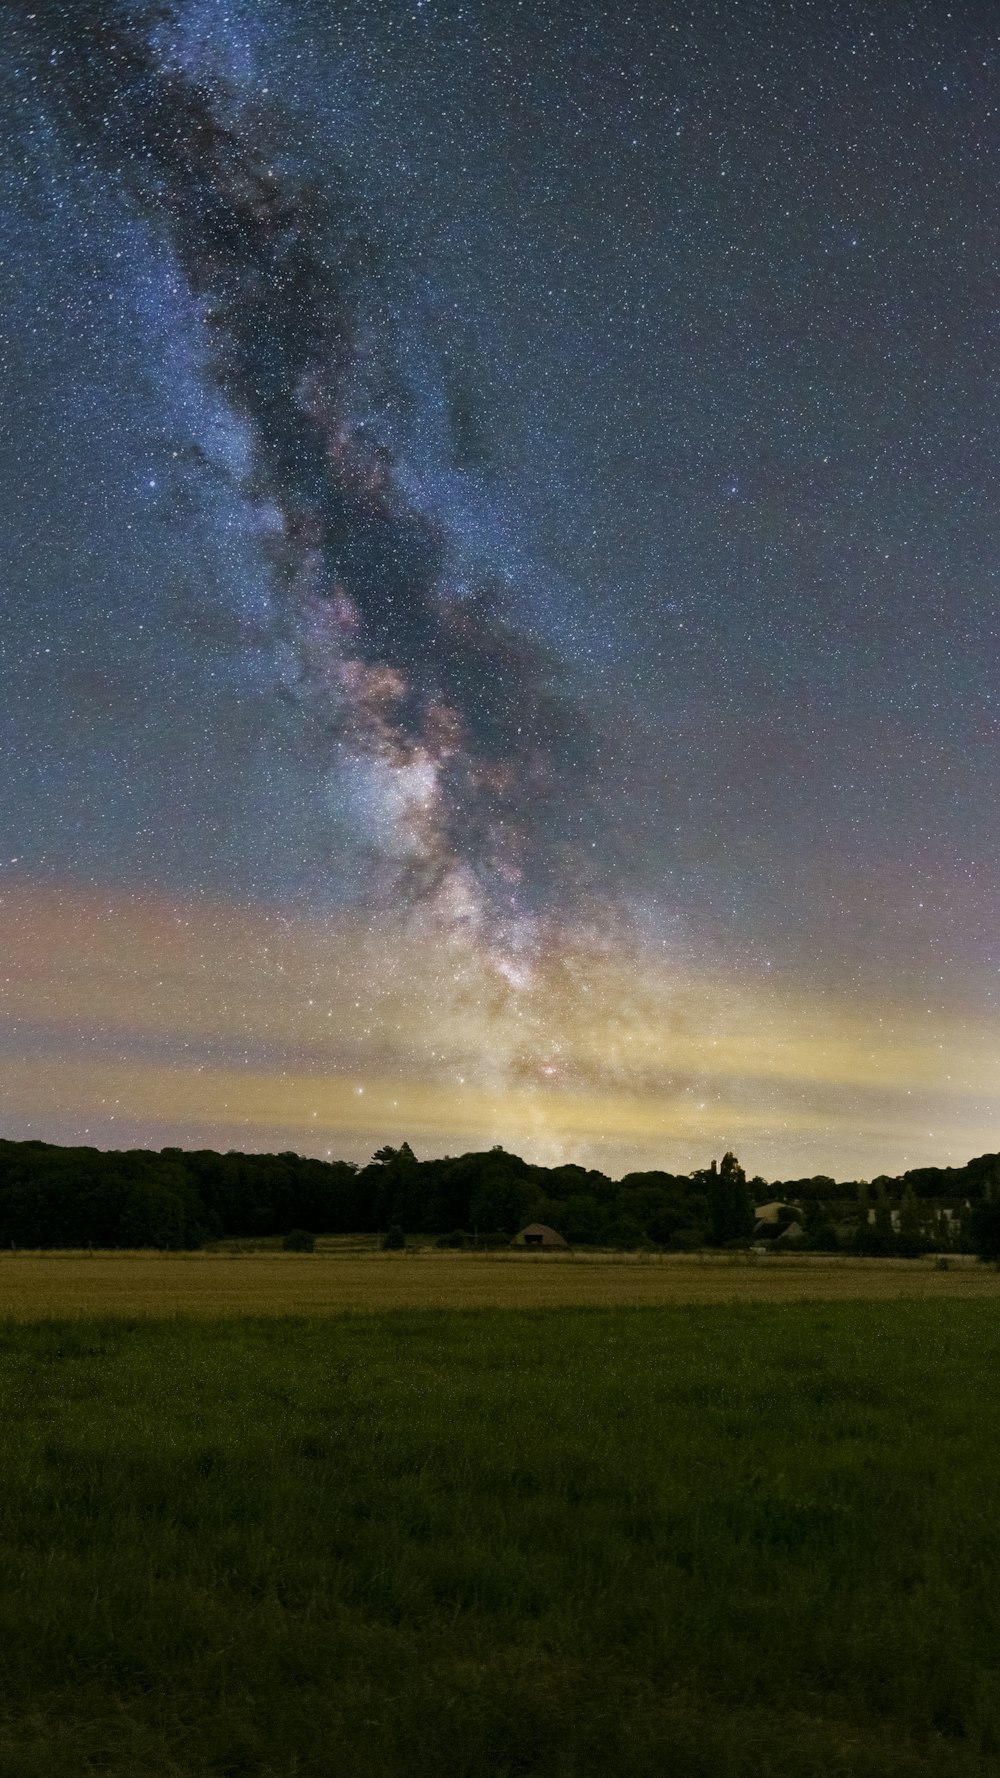 a field with trees and a starry sky above